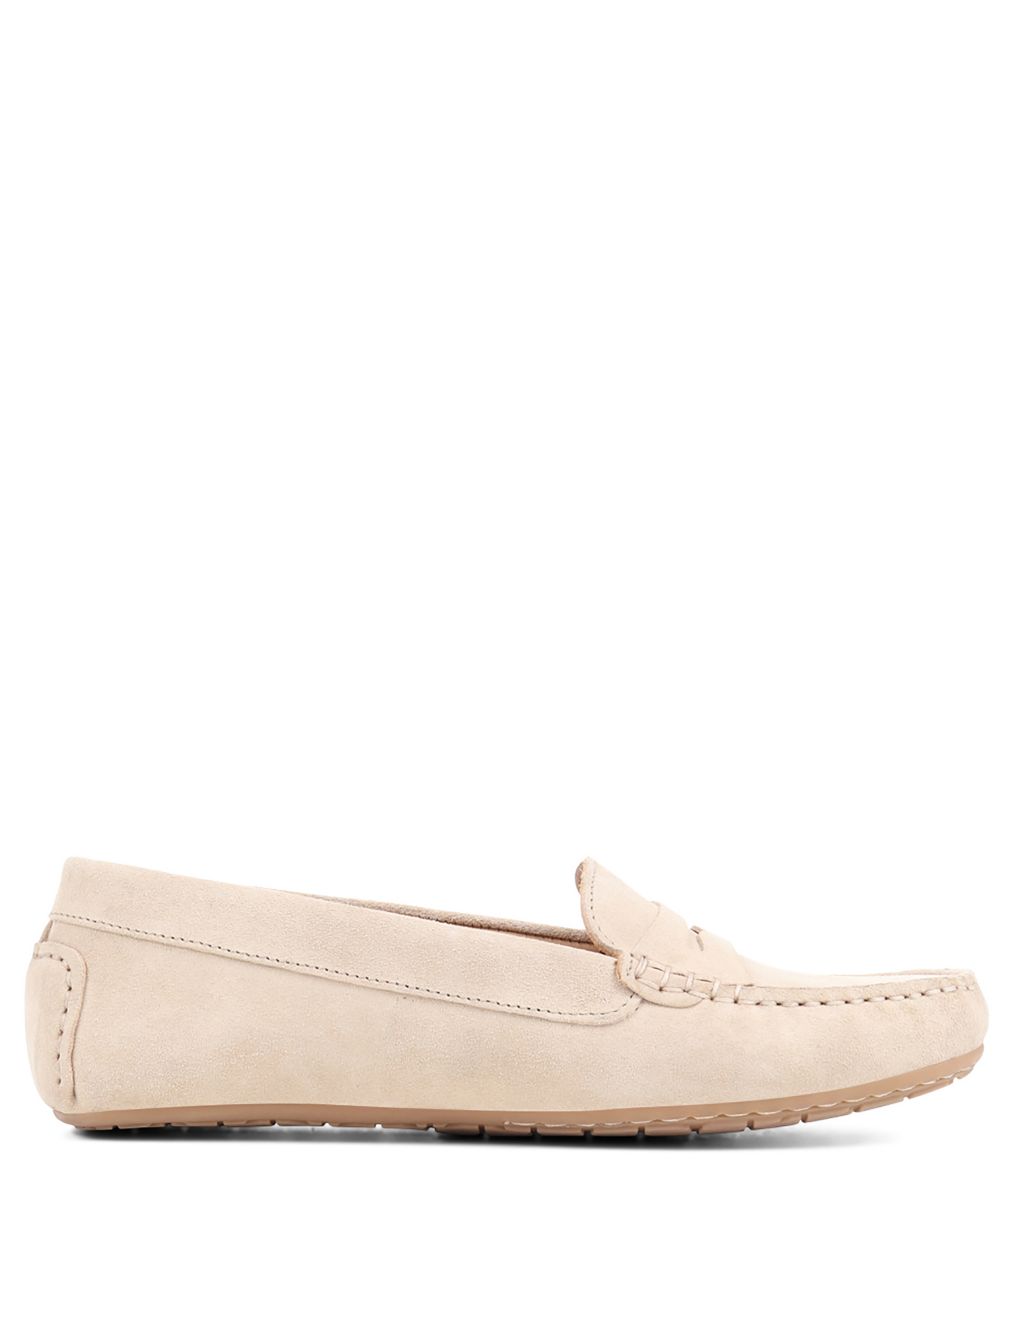 Suede Slip On Loafers image 2